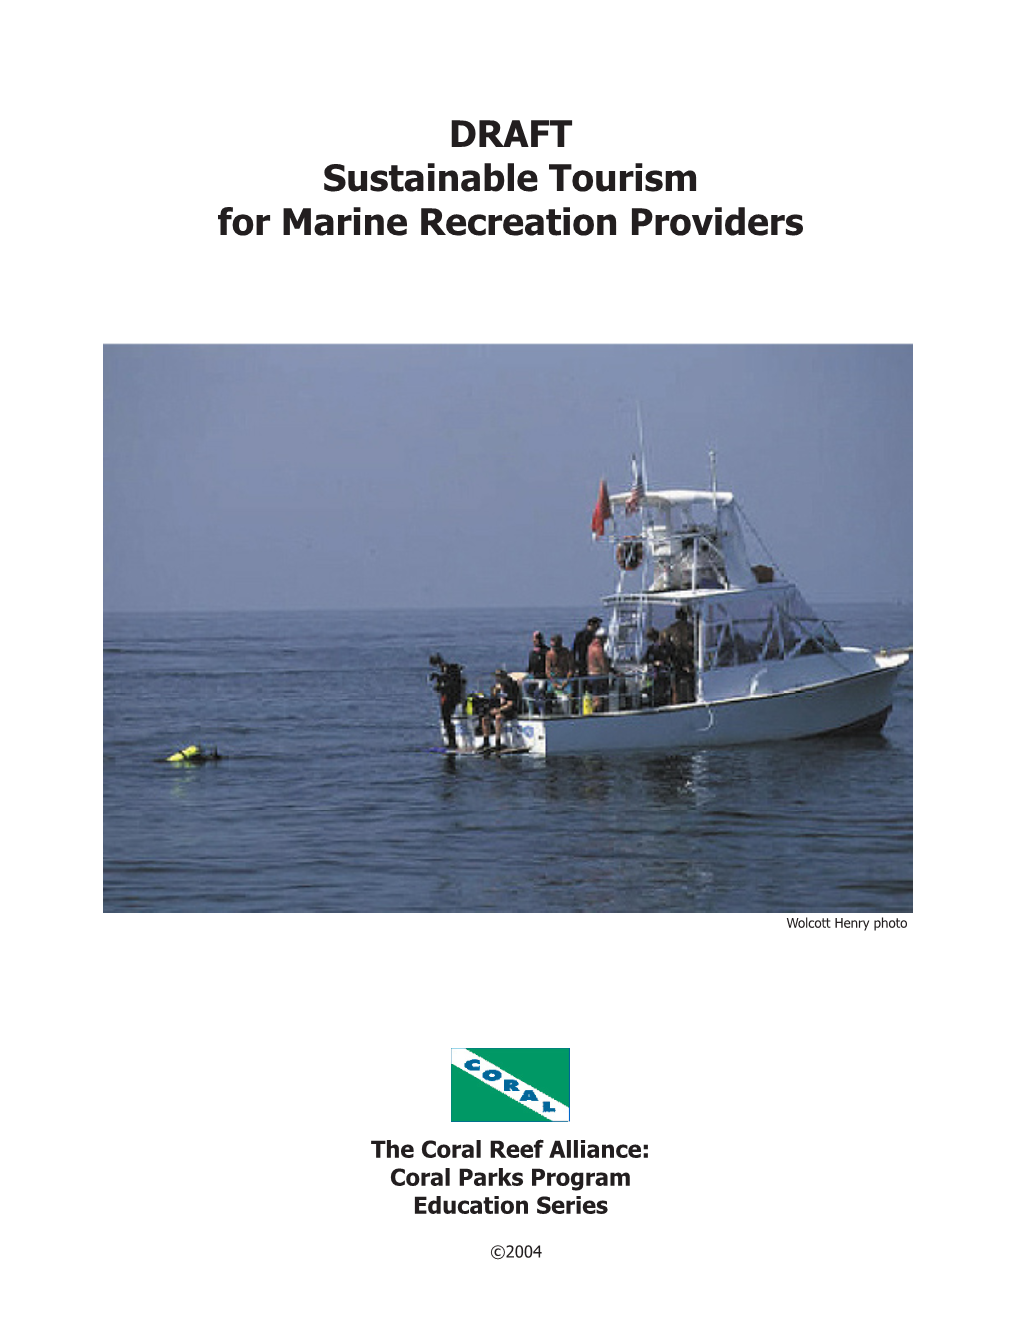 DRAFT Sustainable Tourism for Marine Recreation Providers